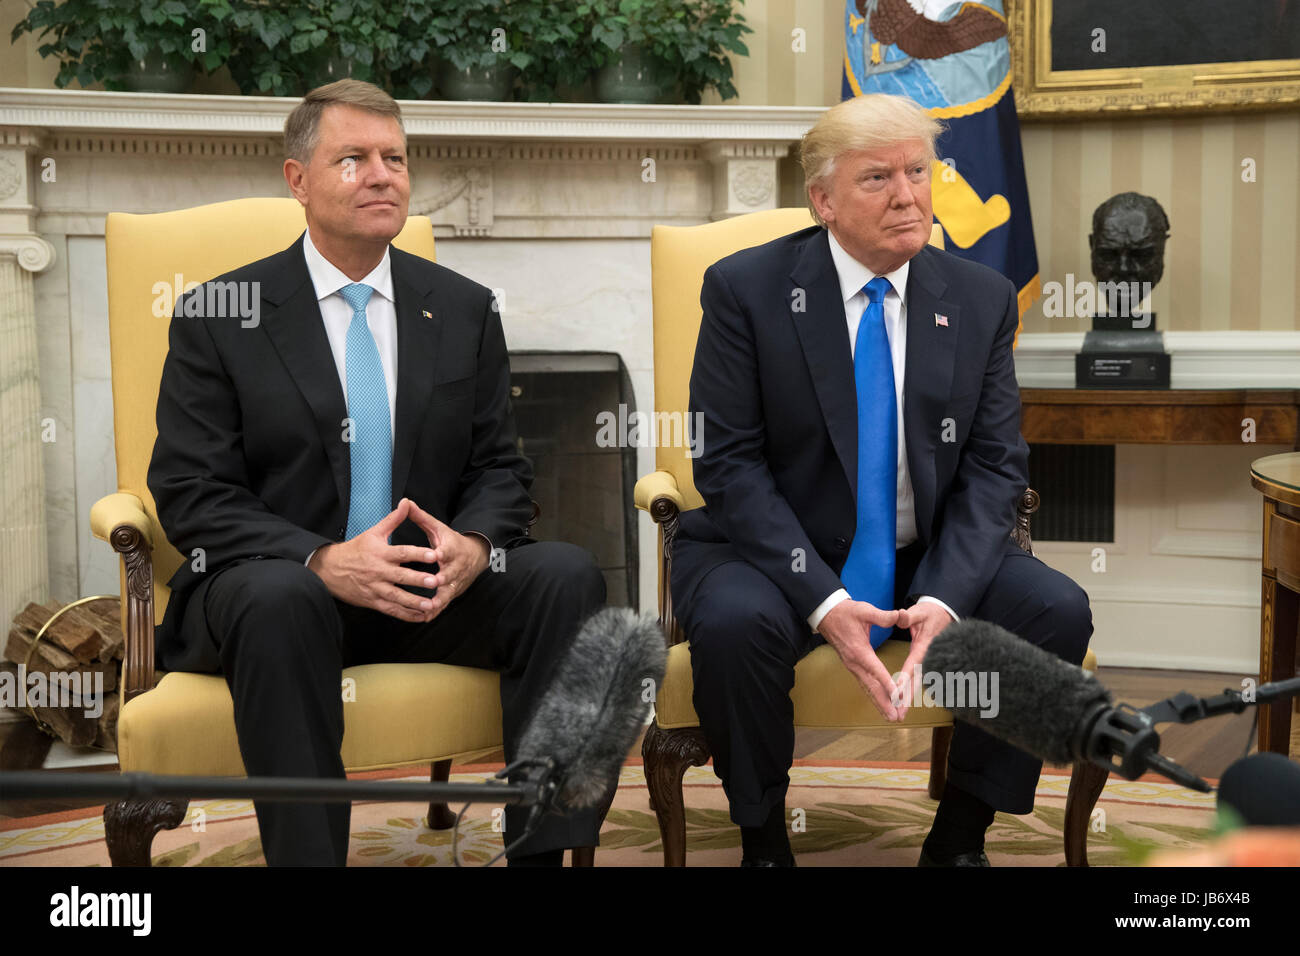 US President Donald J. Trump (R) and President of Romania Klaus Iohannis (L) meet in the Oval Office of the White House, in Washington, DC, USA, 09 June 2017. Credit: Michael Reynolds/Pool via CNP /MediaPunch Stock Photo